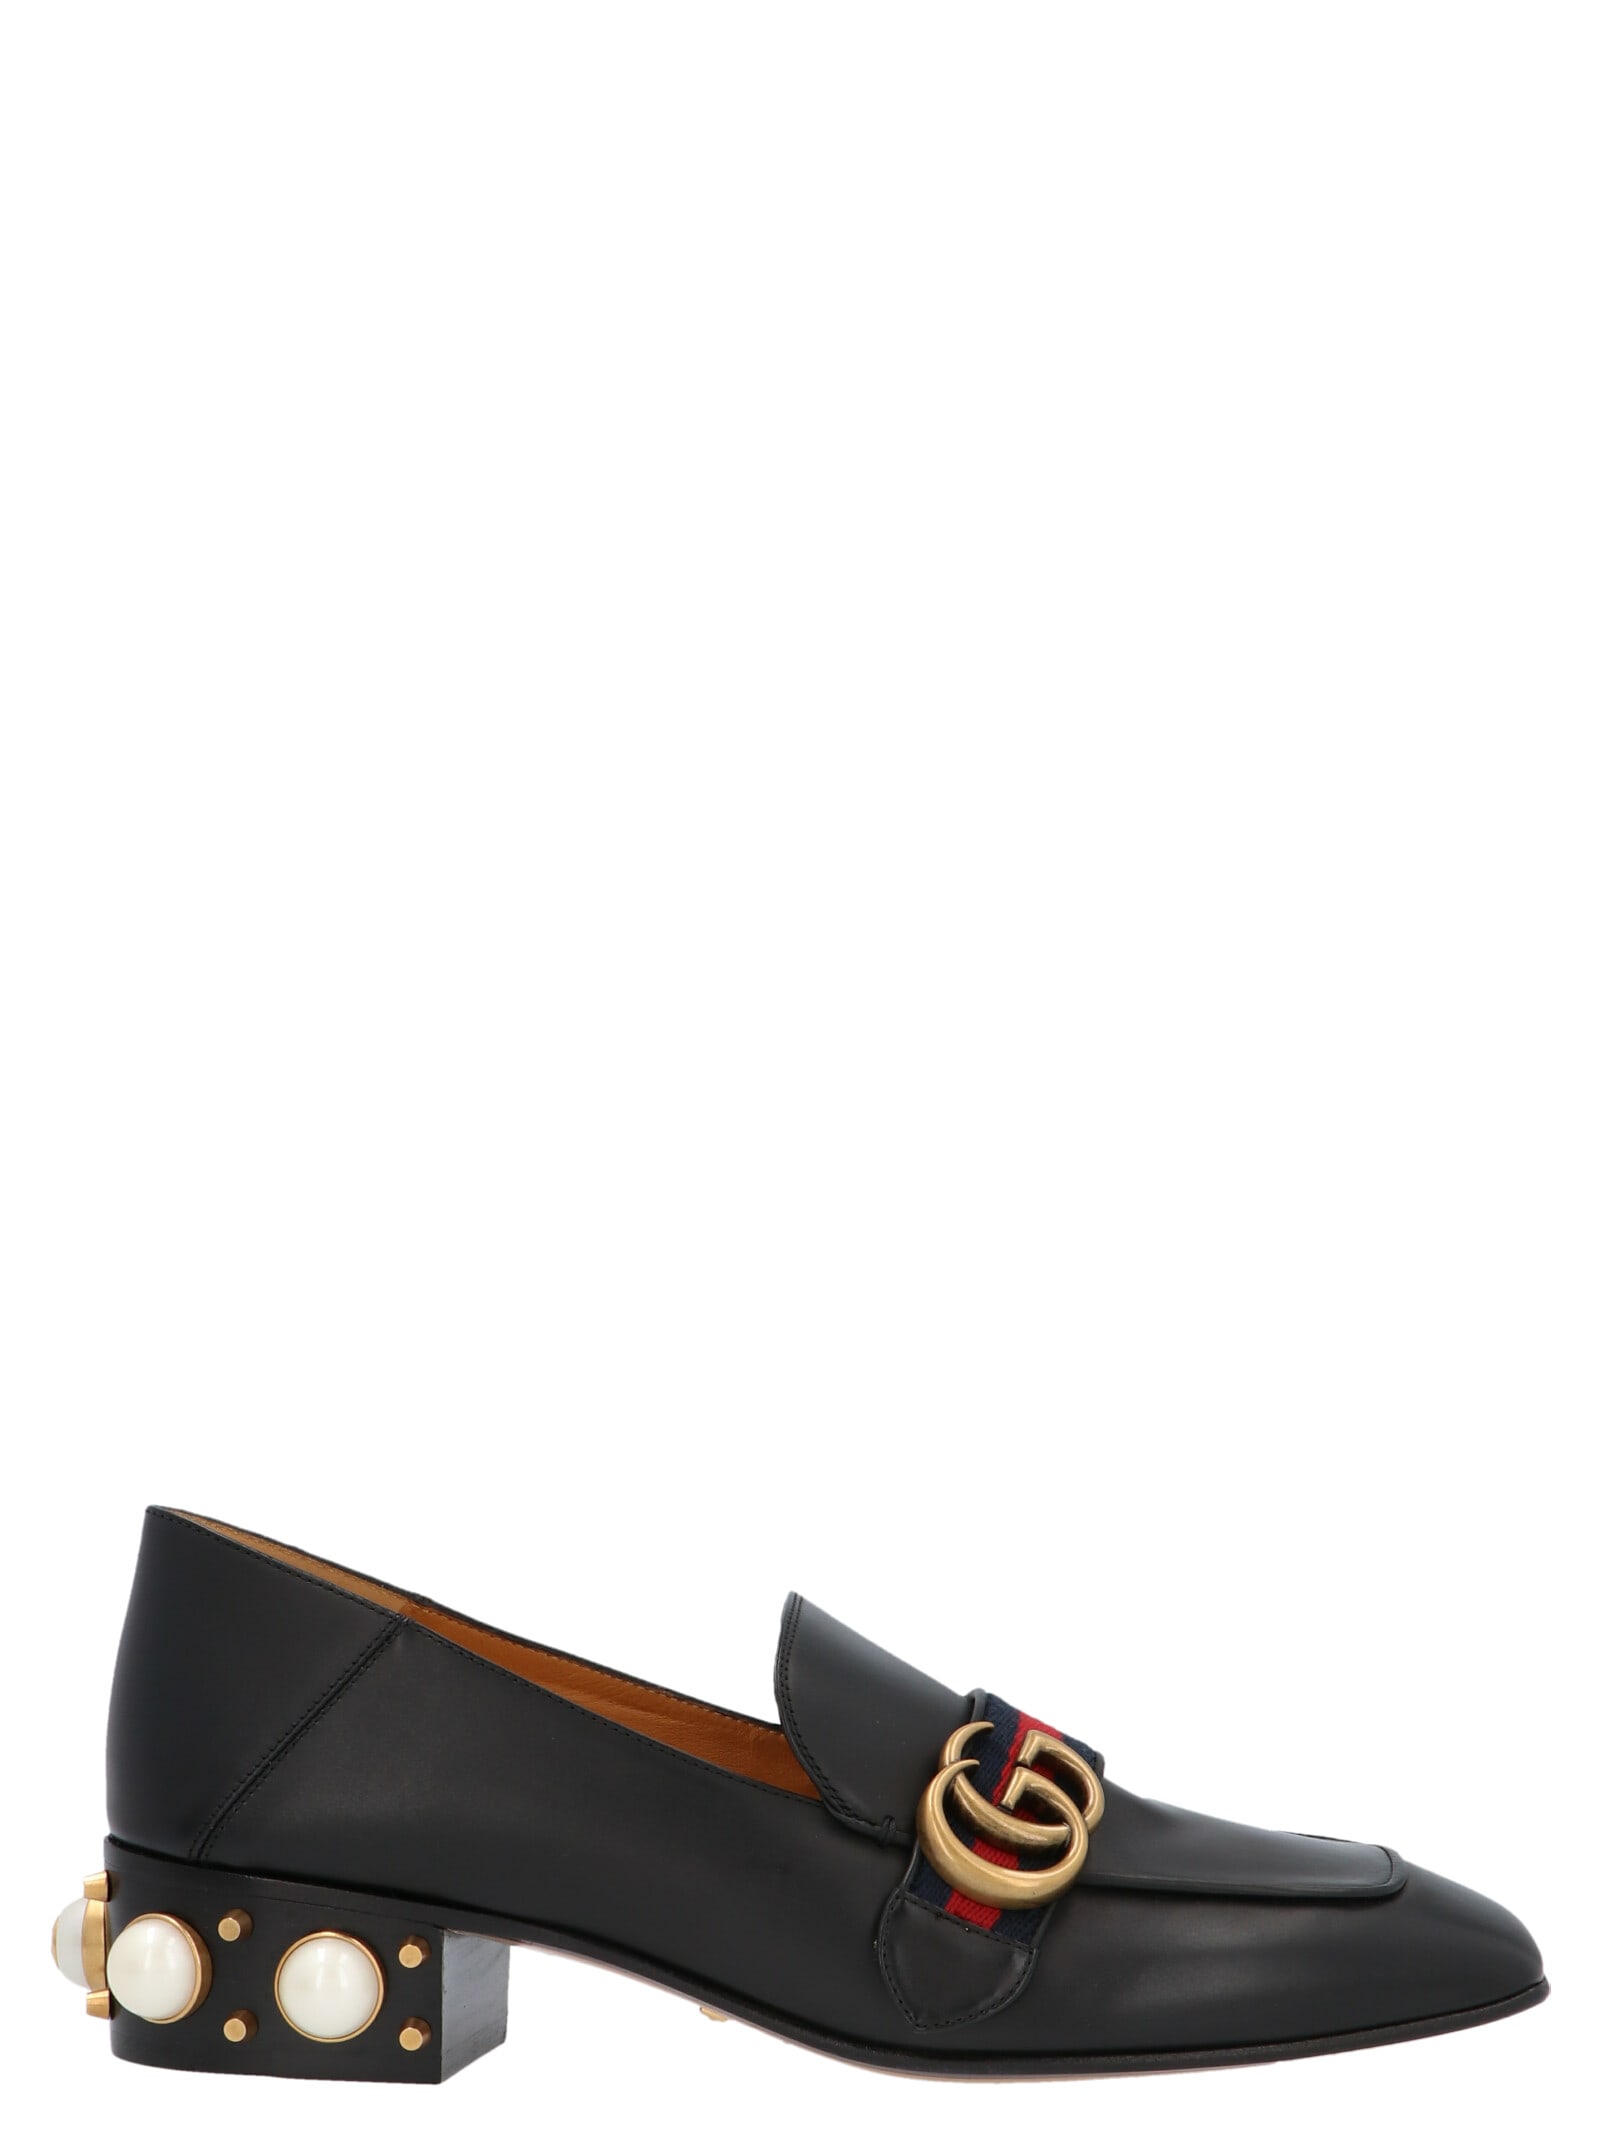 Buy Gucci Leather Mid-heel Loafer online, shop Gucci shoes with free shipping